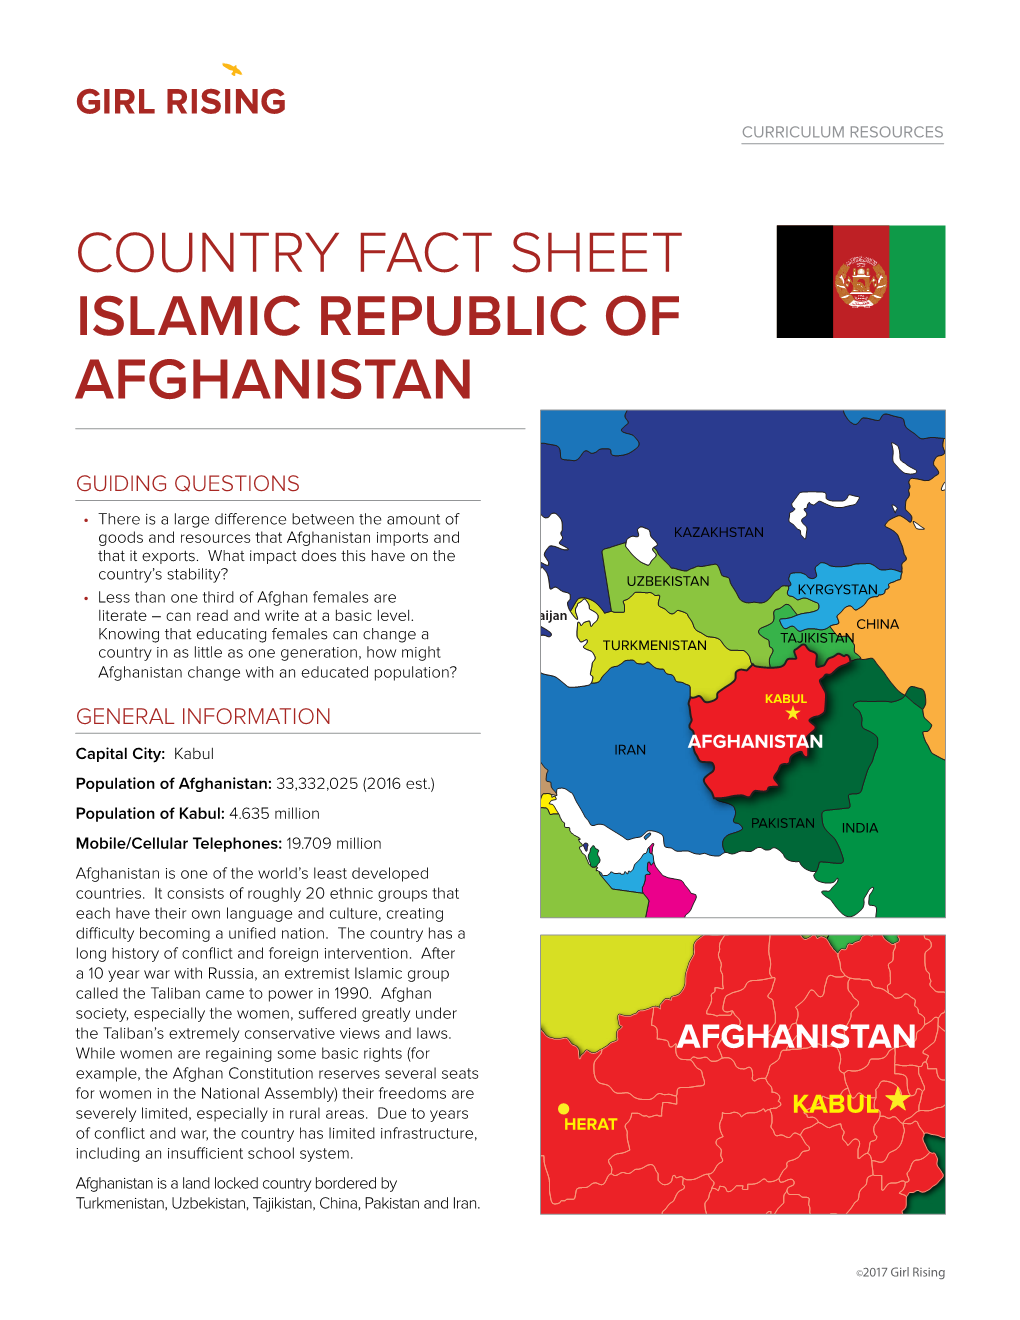 Country Fact Sheet Islamic Republic of Afghanistan